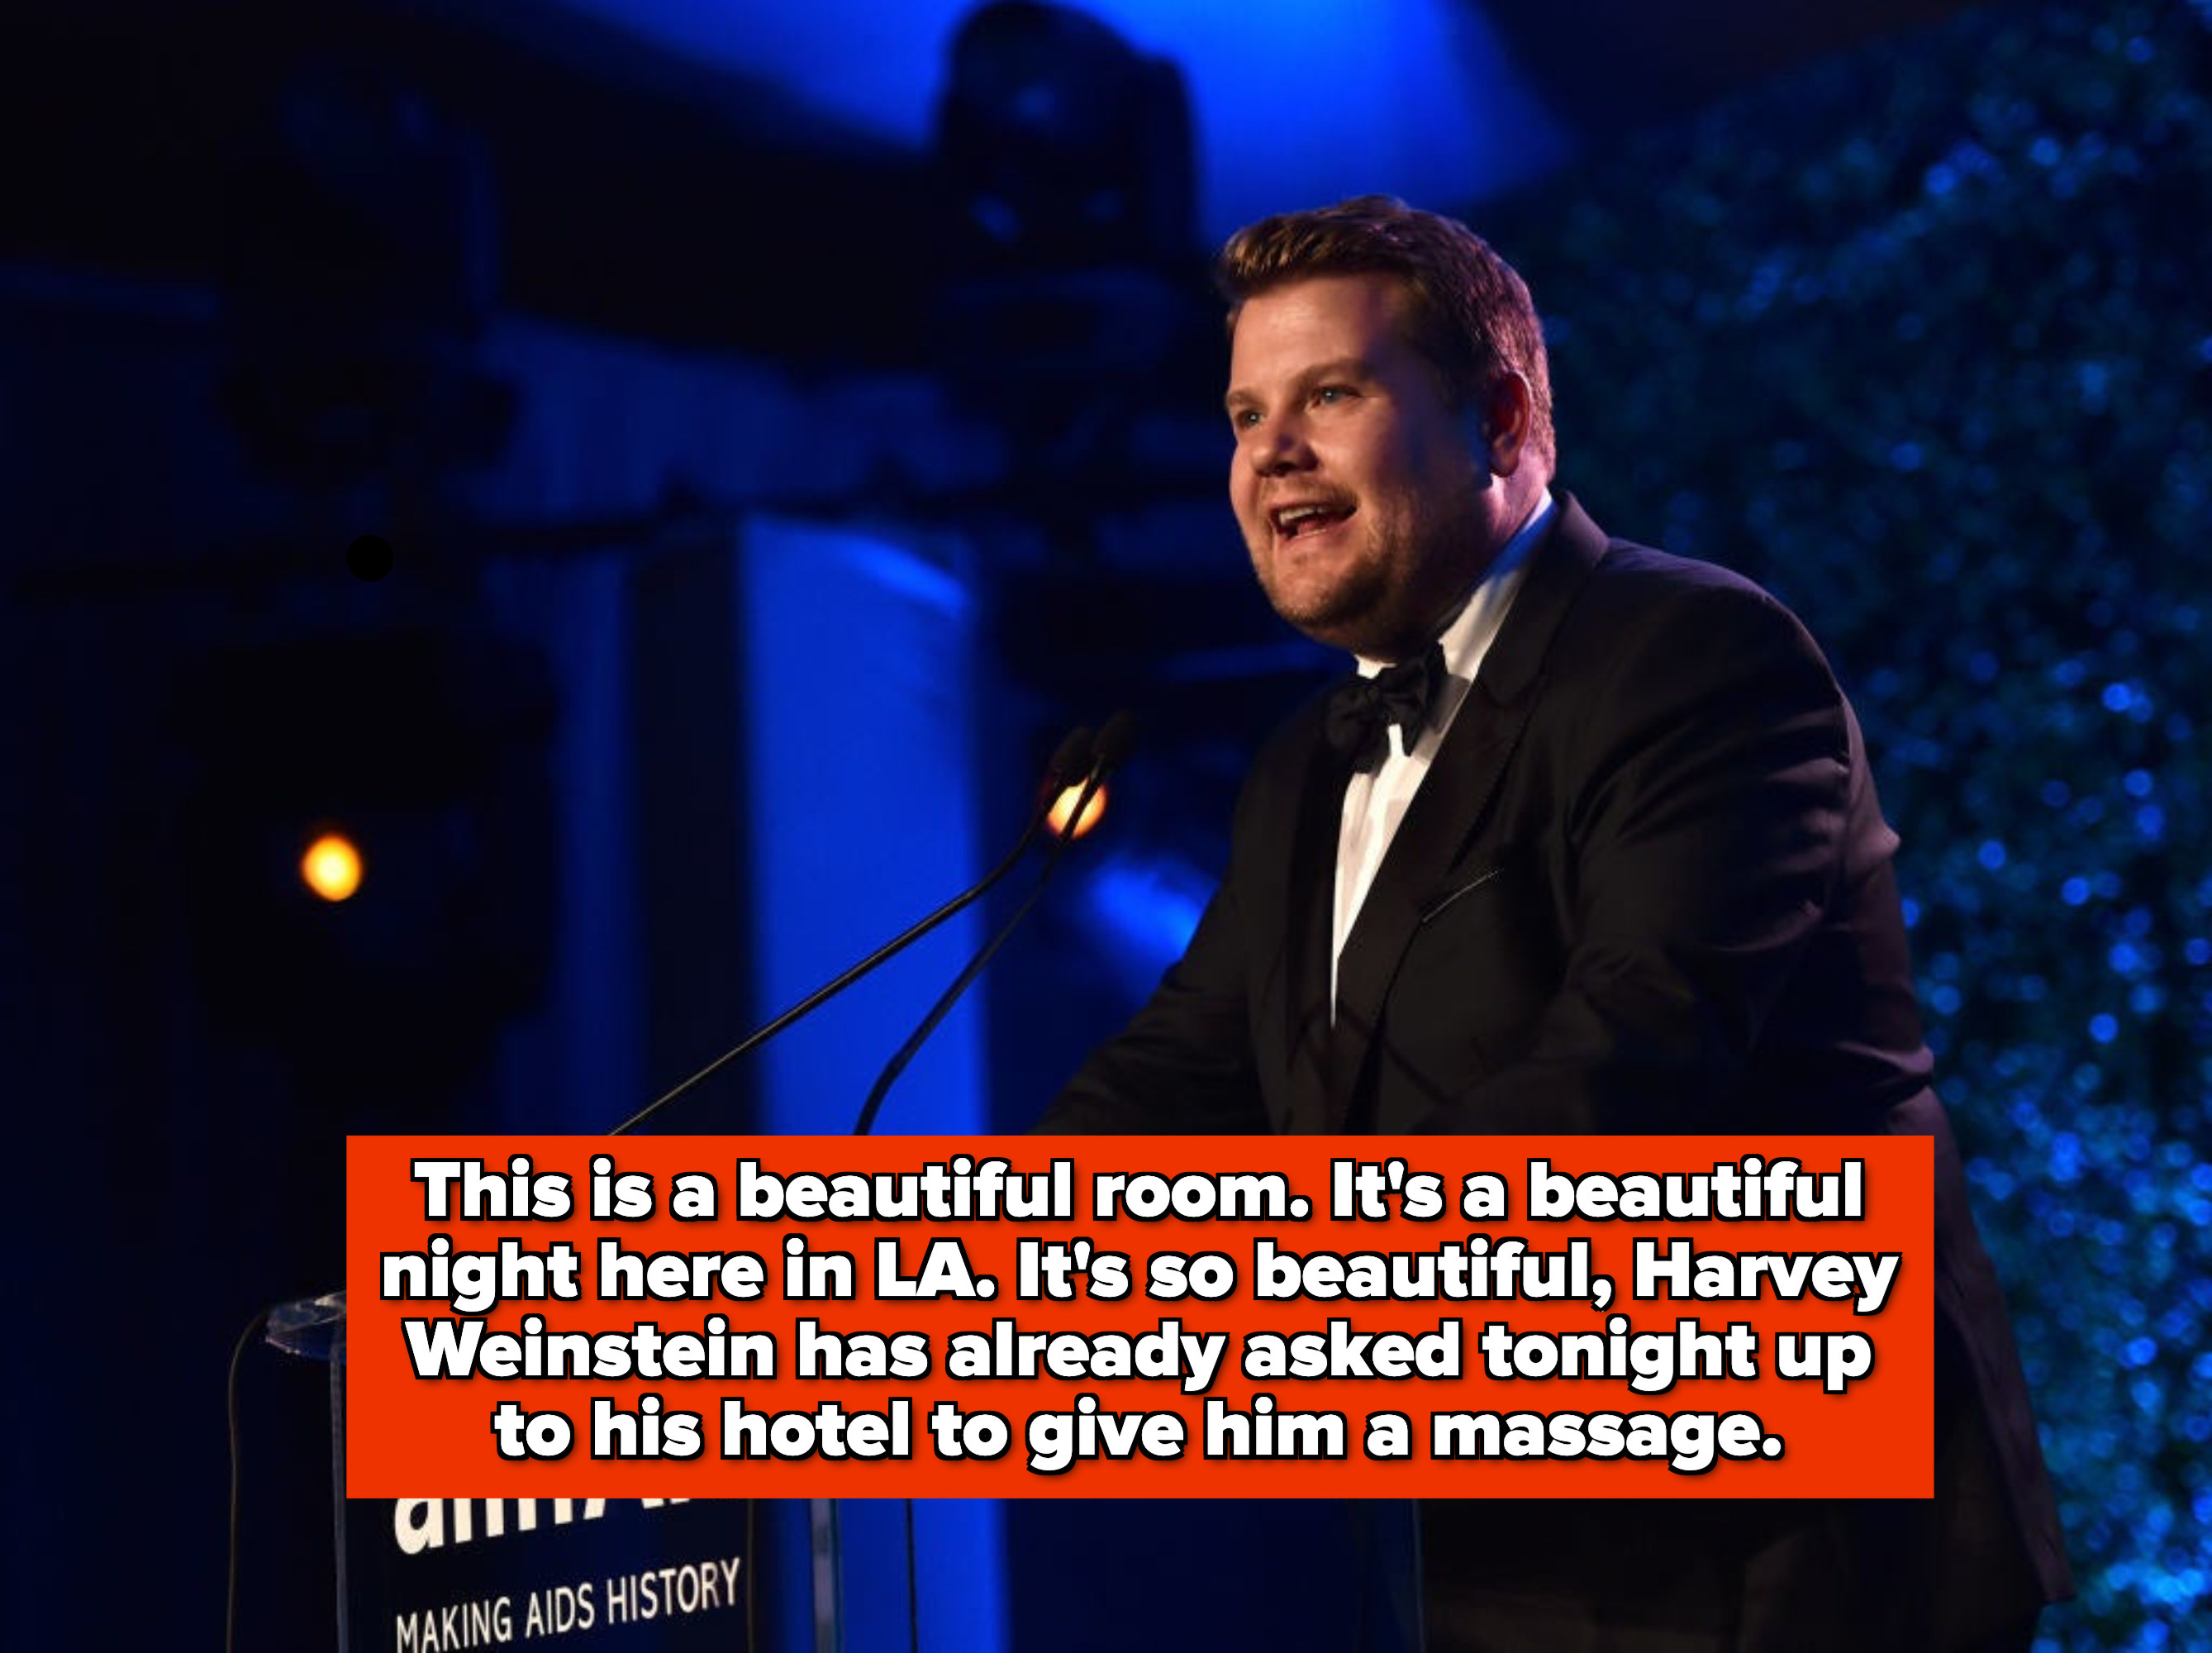 James at the podium saying it&#x27;s a beautiful room and a beautiful night in LA — so beautiful, Harvey has already asked &quot;tonight&quot; up to his hotel to give him a massage